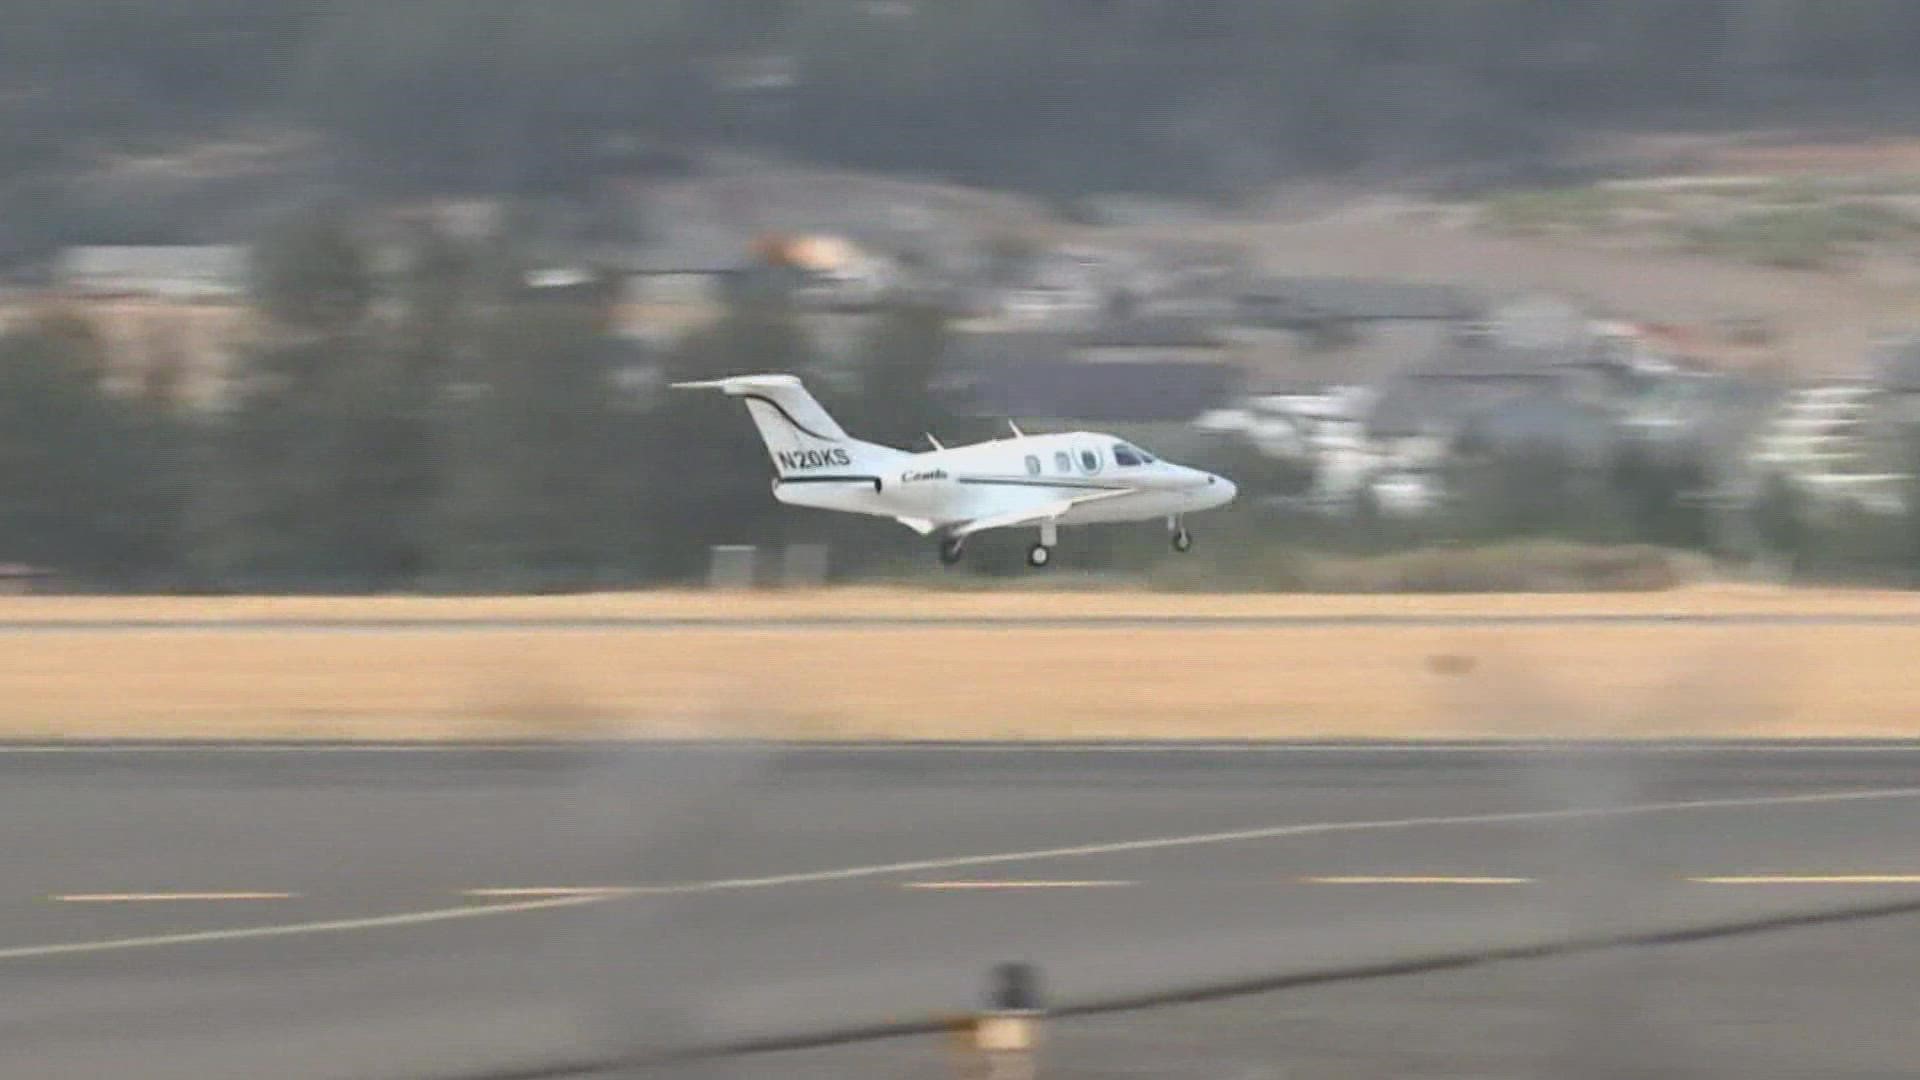 Thanks to the quick thinking and generosity of one local pilot, the girl landed Friday in Spokane to spend her final days at home instead of in a hospital.